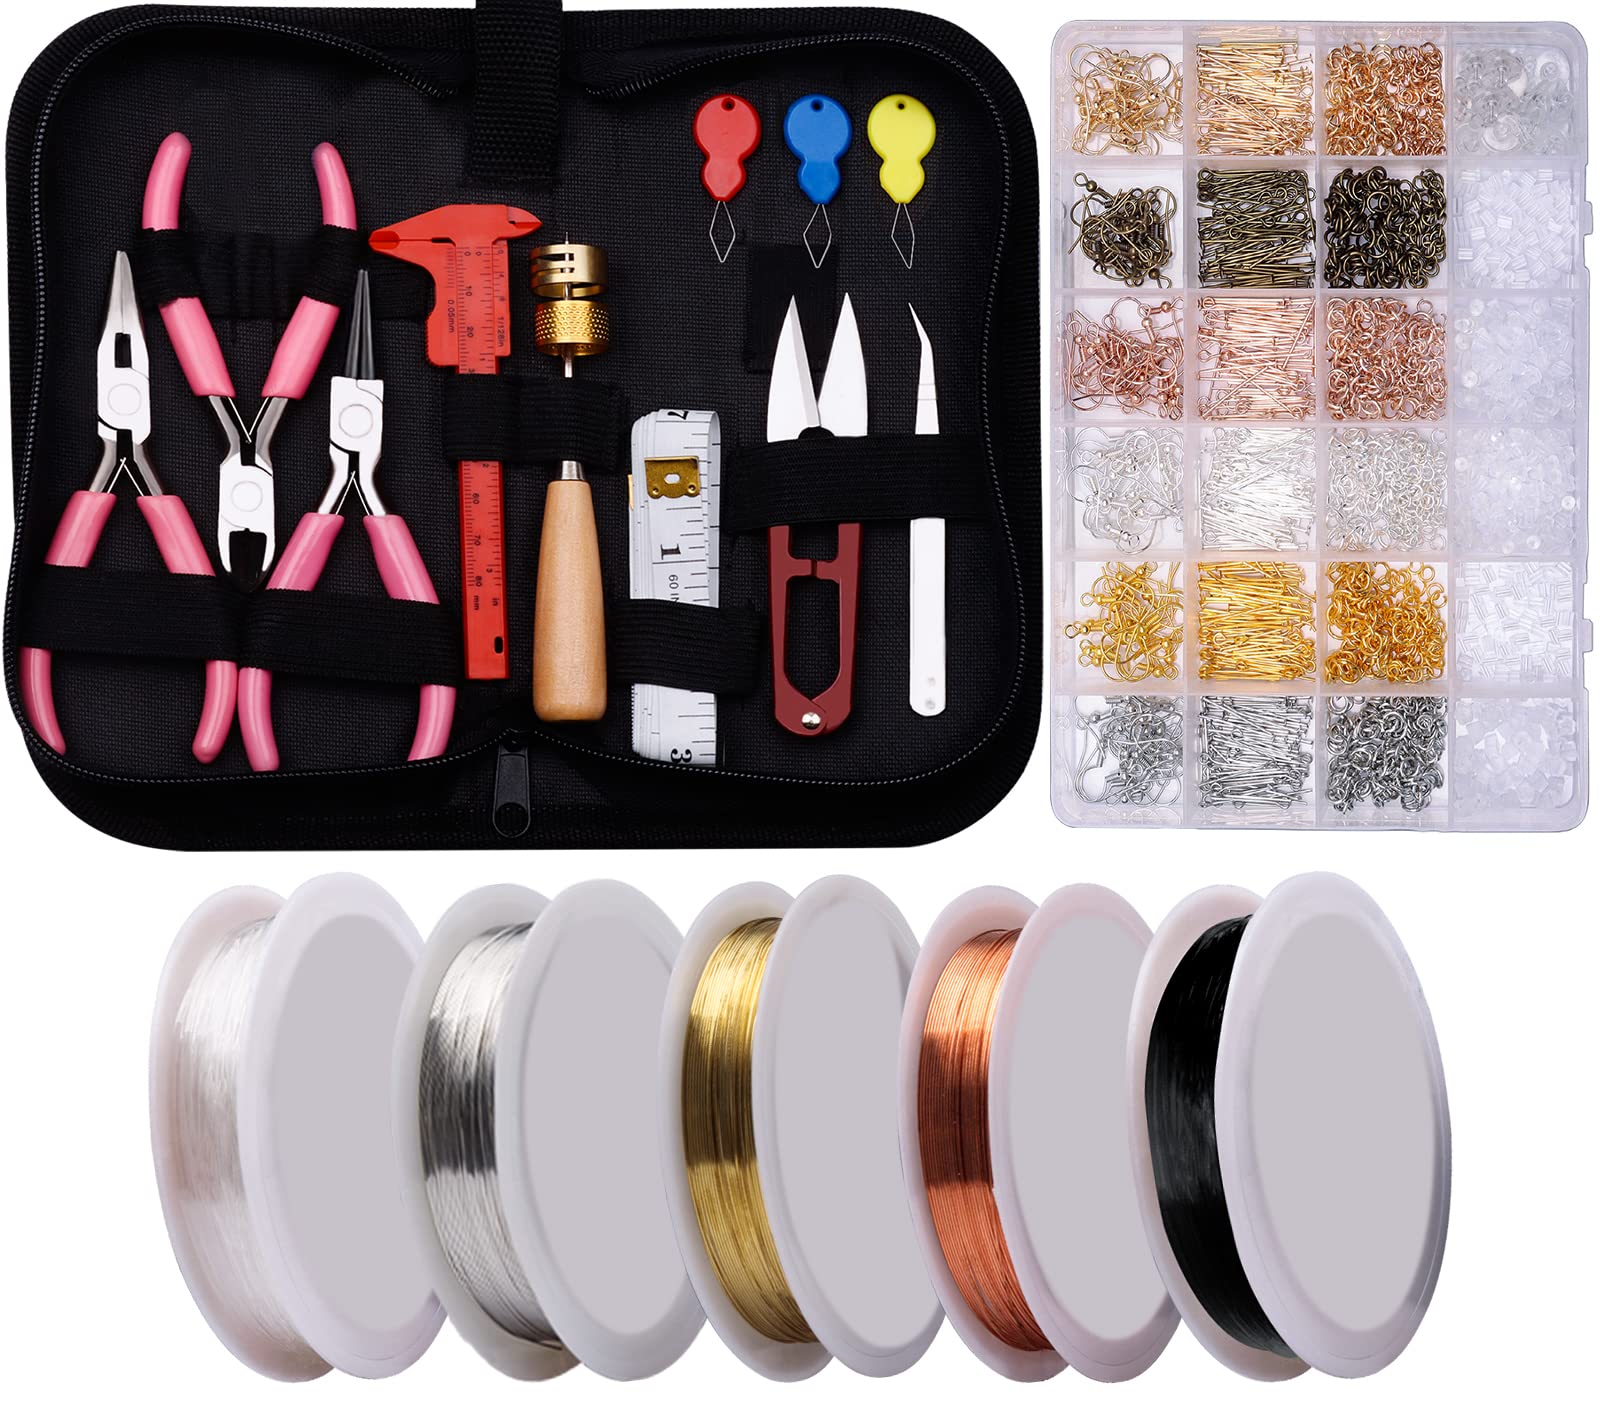 Jewelry Making Kits for Adults, Wire Wrapping Kit with Tools, Jewelry  accessories,Wire, Accessories for jewelry Making and Repair